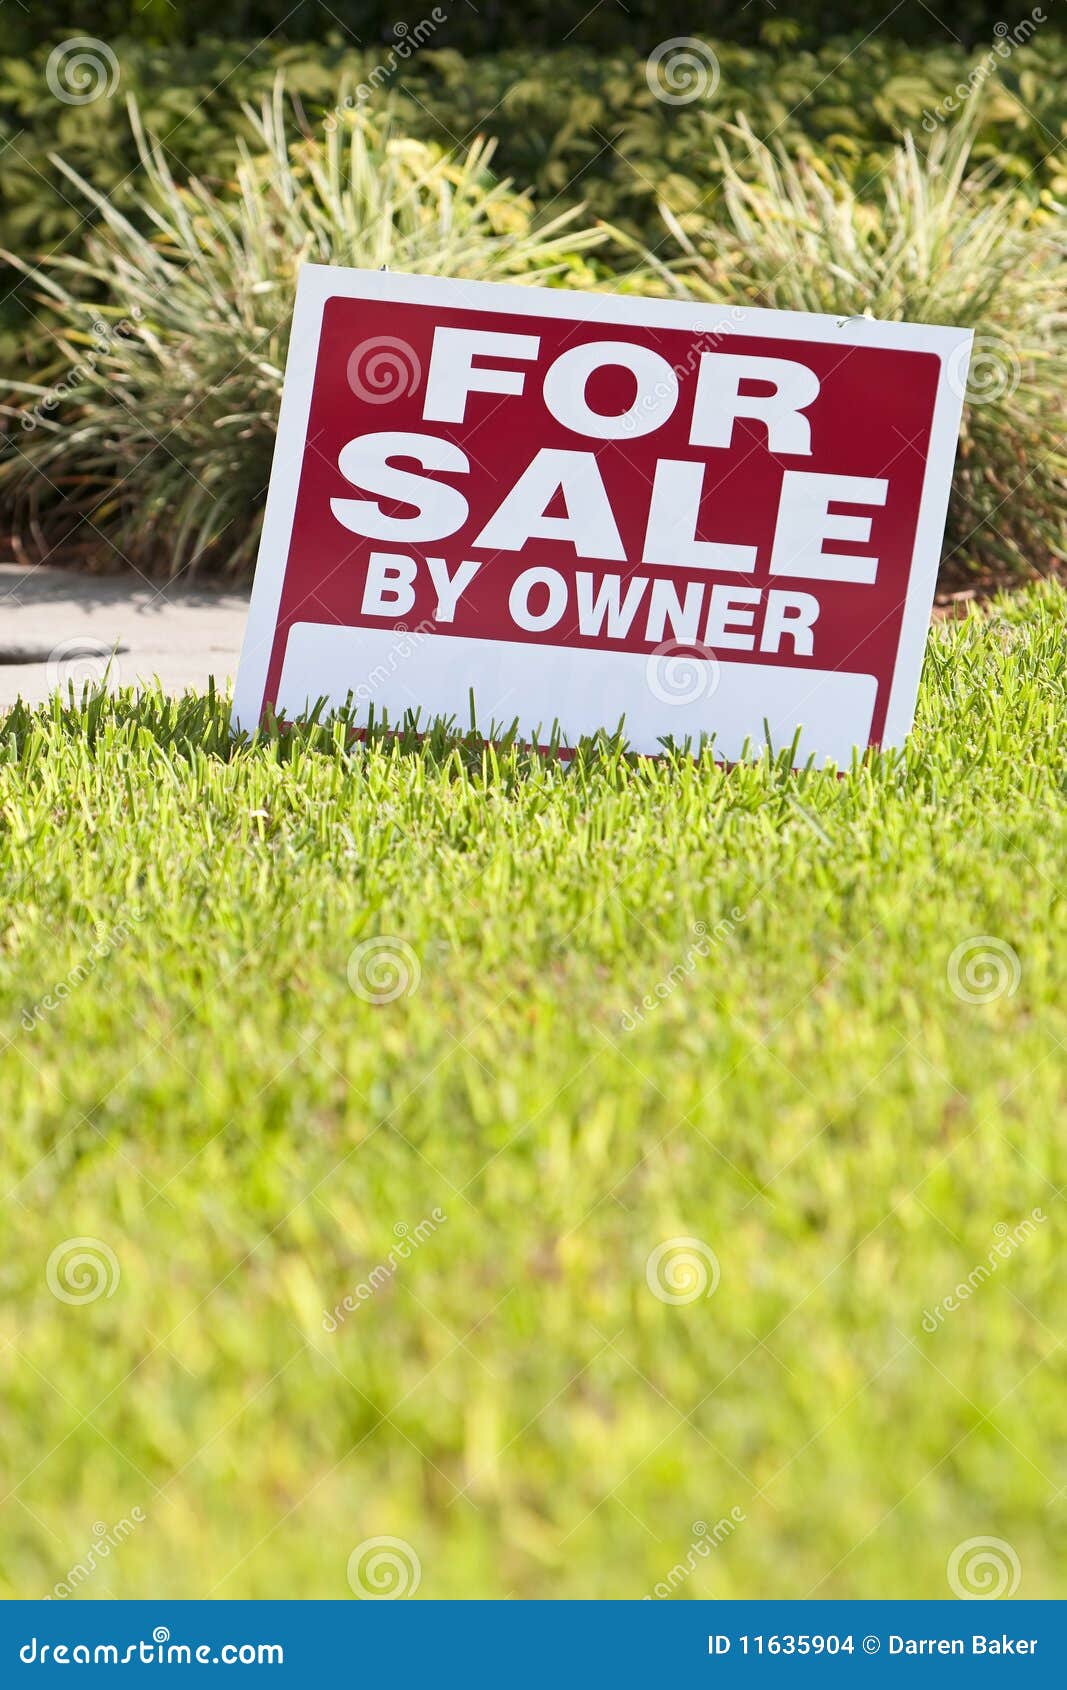 house or sale by owner